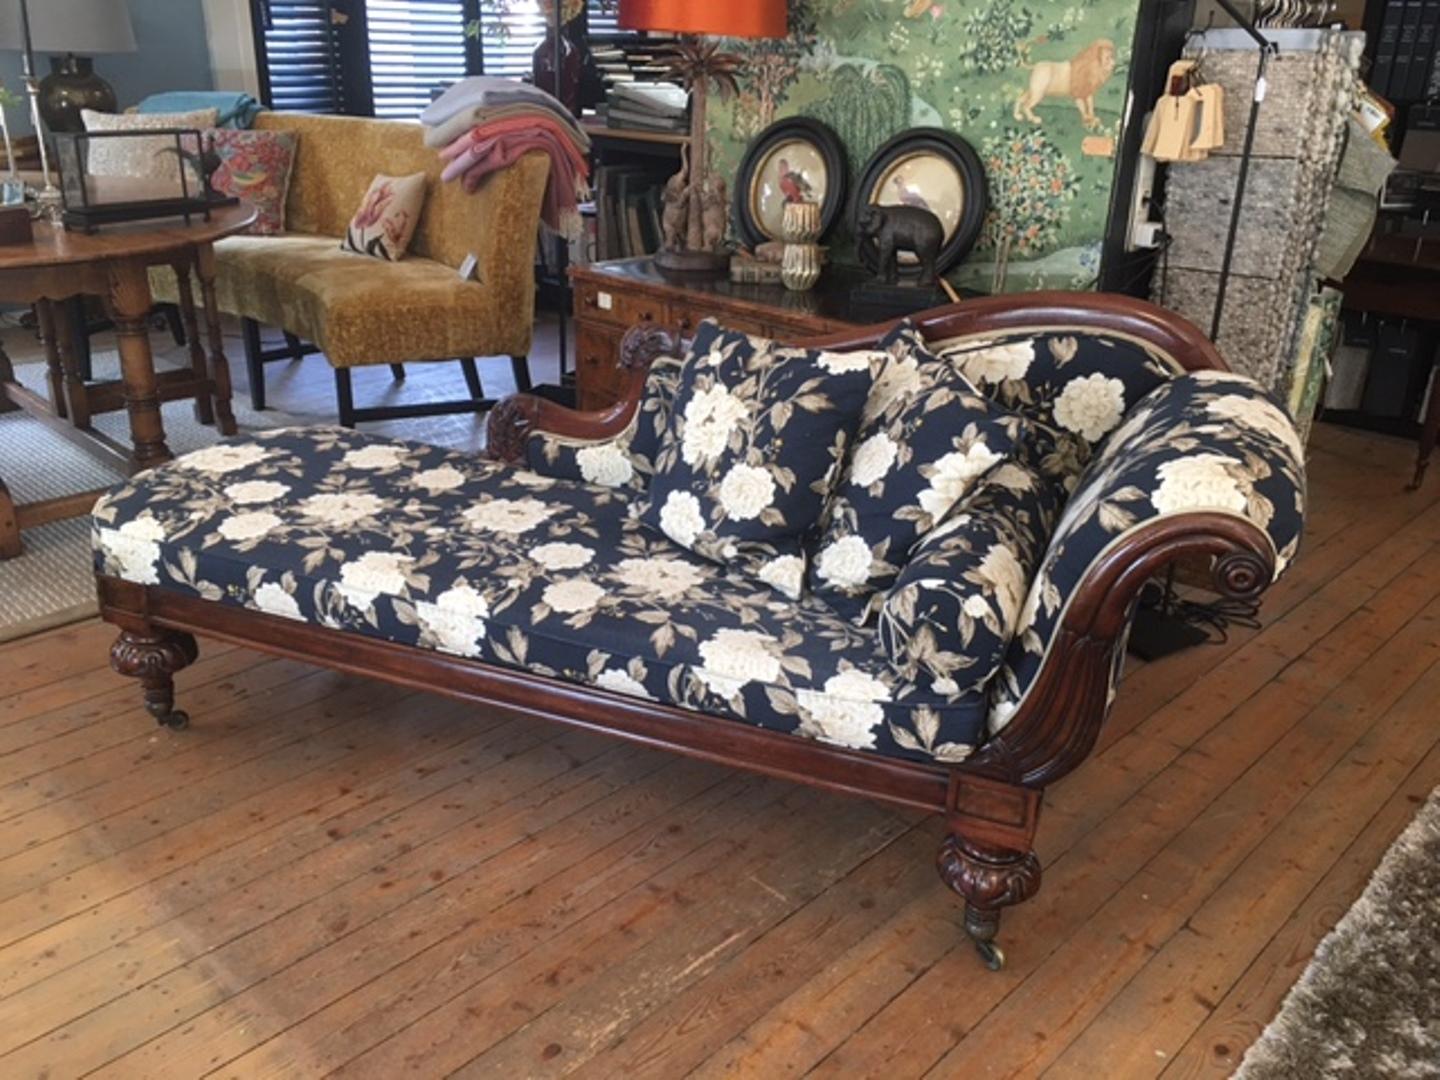 Antique chaisse longue sofa in very good condition. Beautiful version with beautiful legs and details. Upholstery has recently been completely renewed, including complete interior. fabric in very good condition.

Origin: England

Period: Approx.